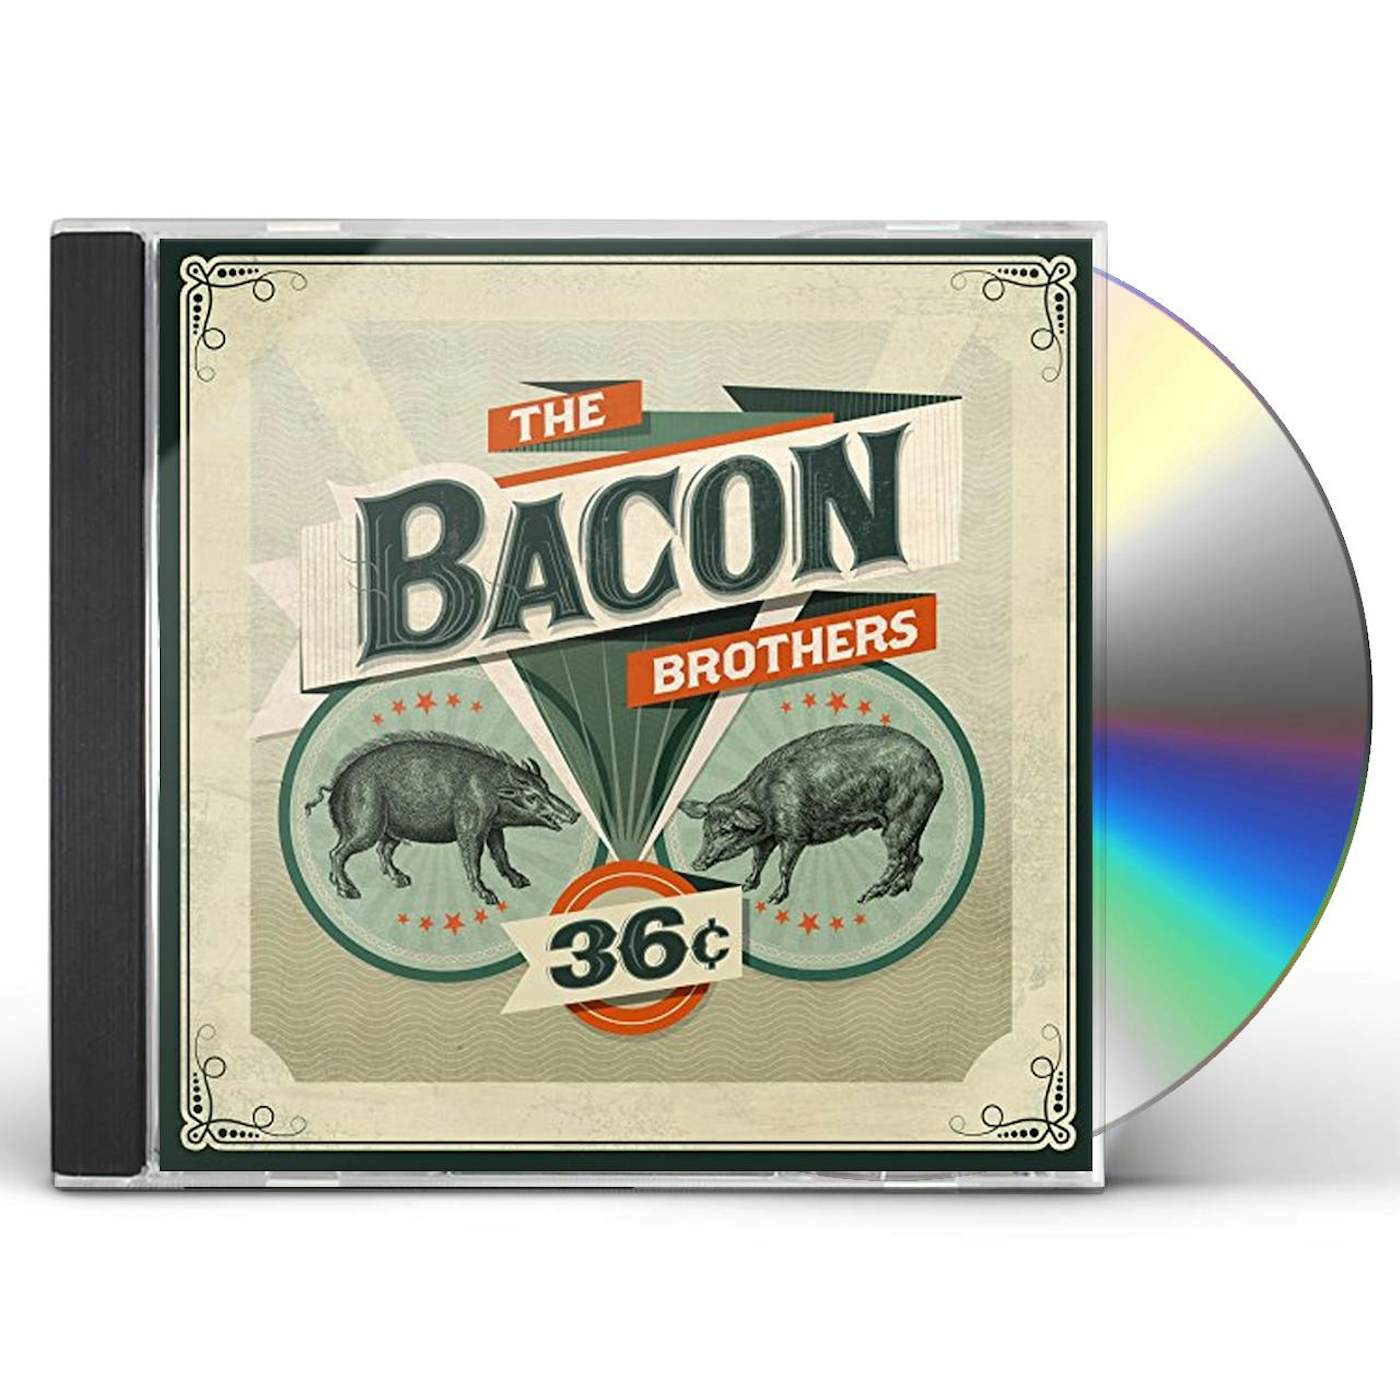 The Bacon Brothers 36 CENTS CD